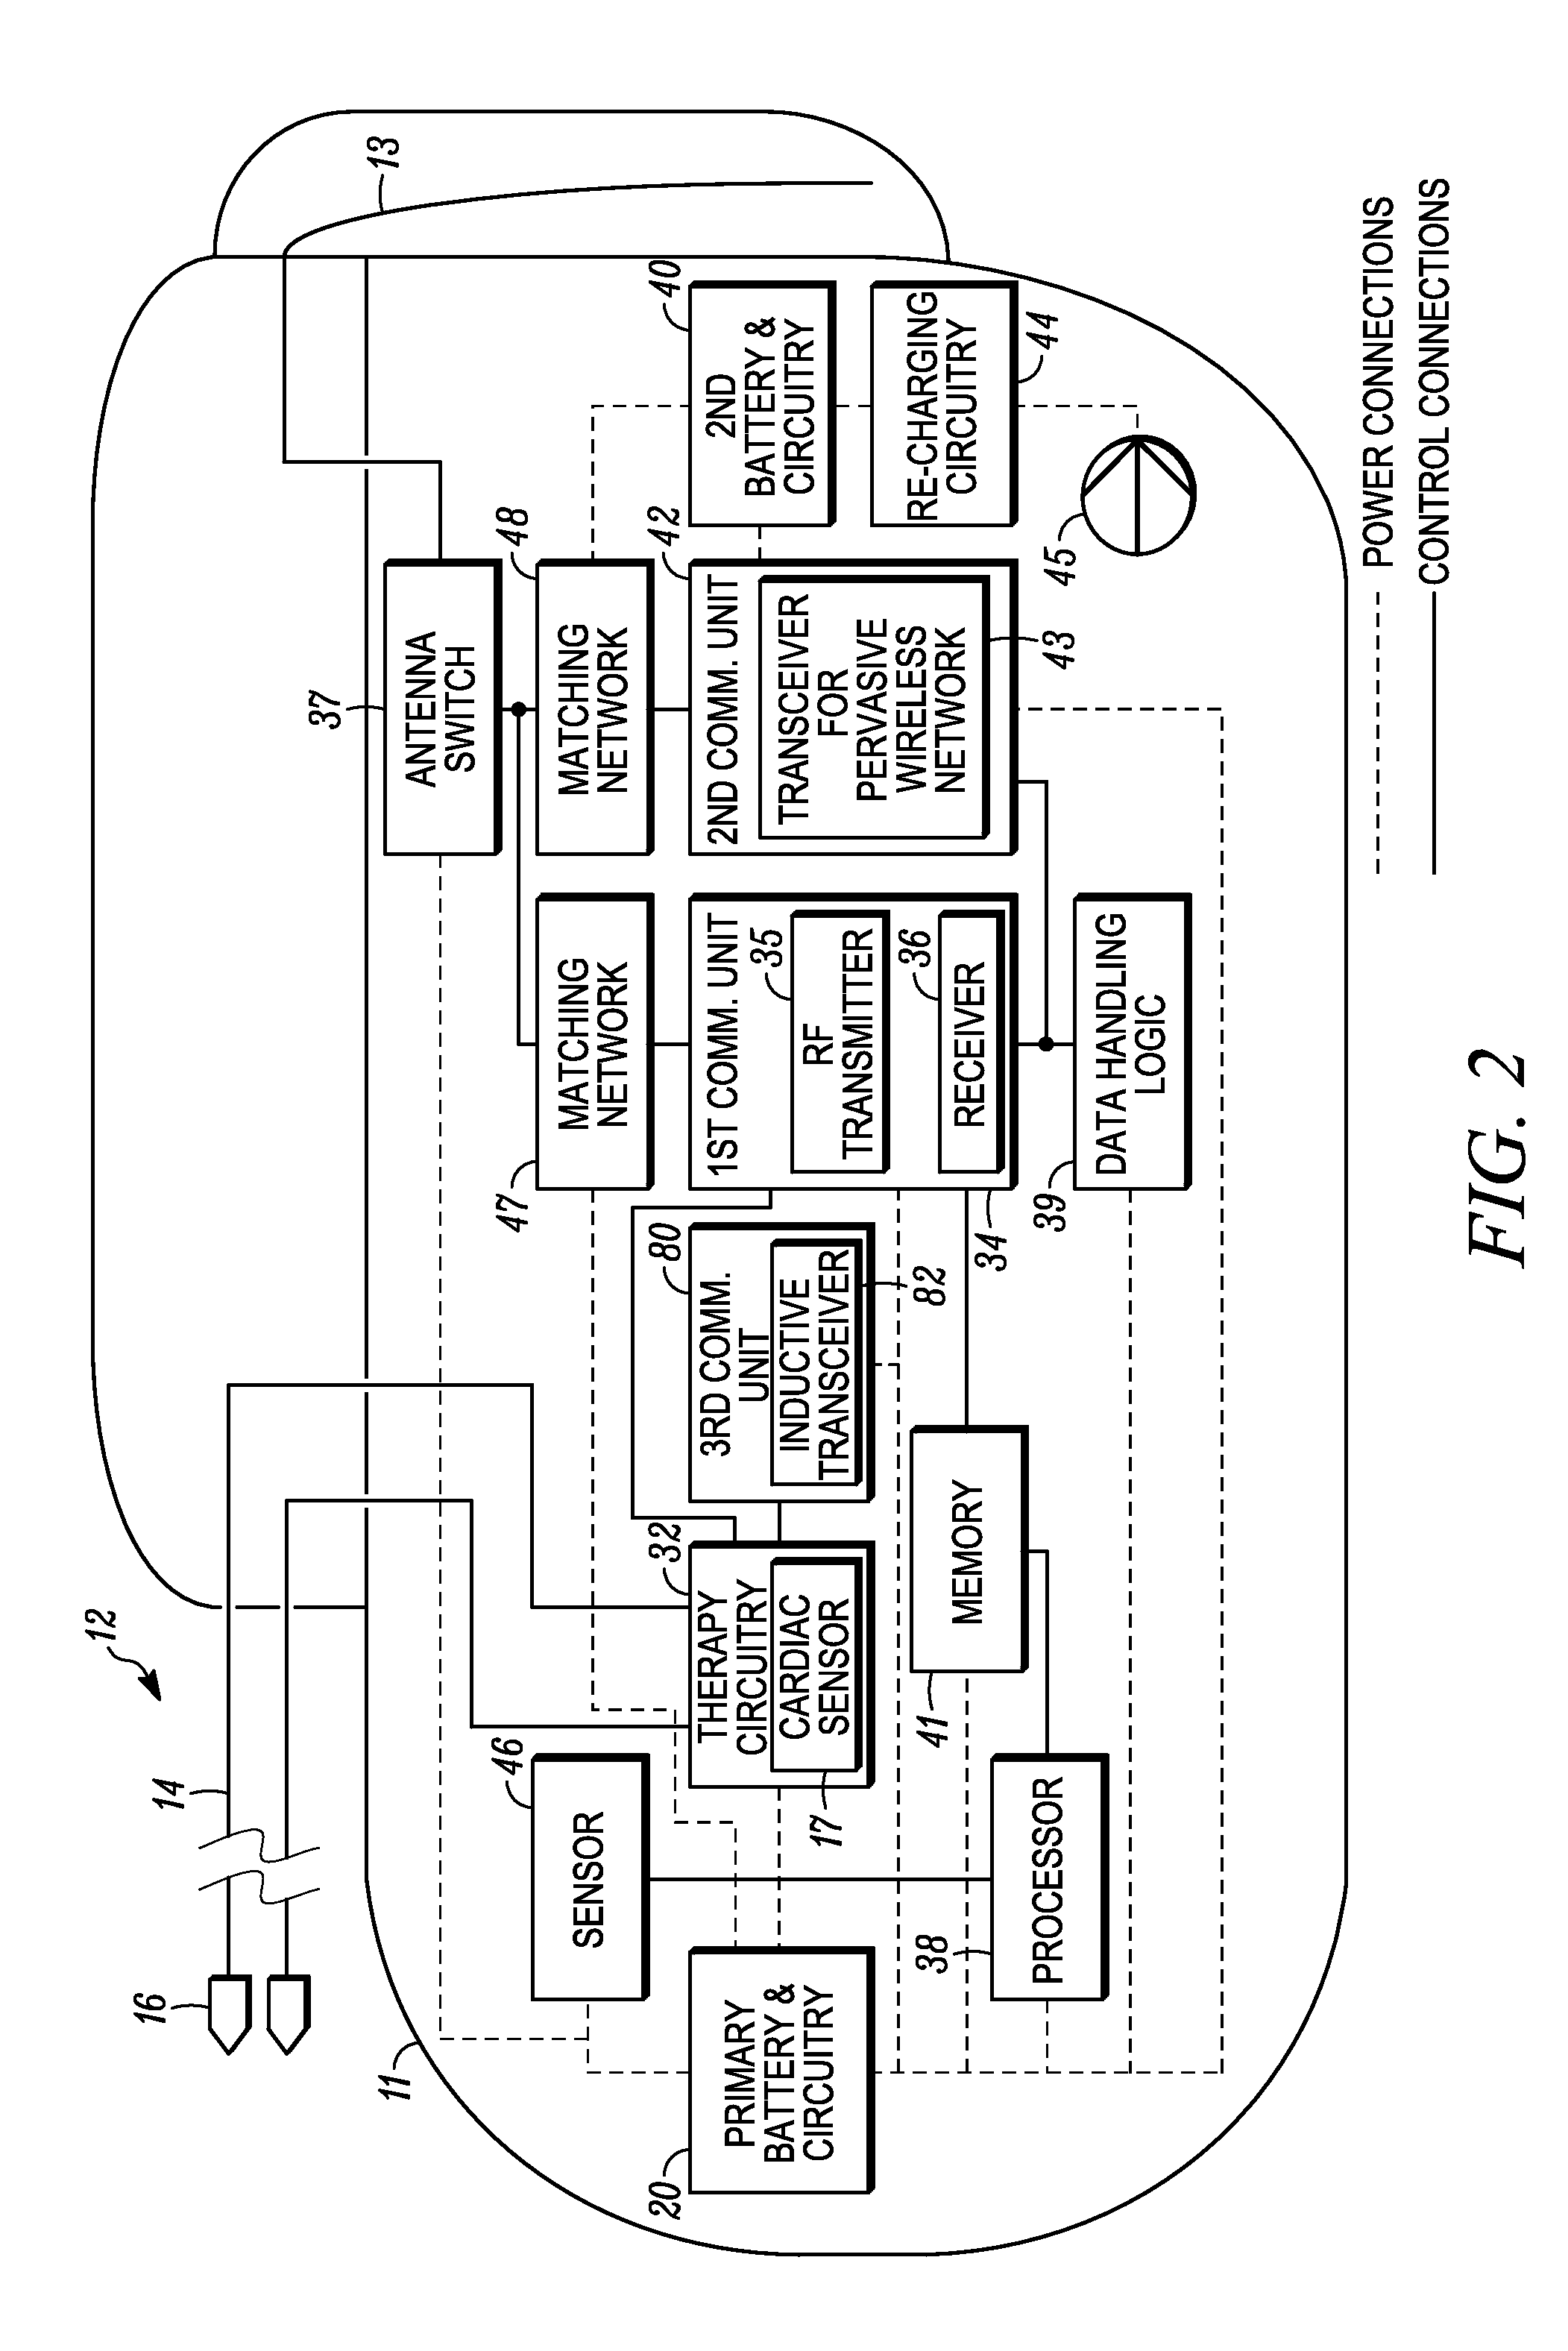 Implantable medical device with wireless communications